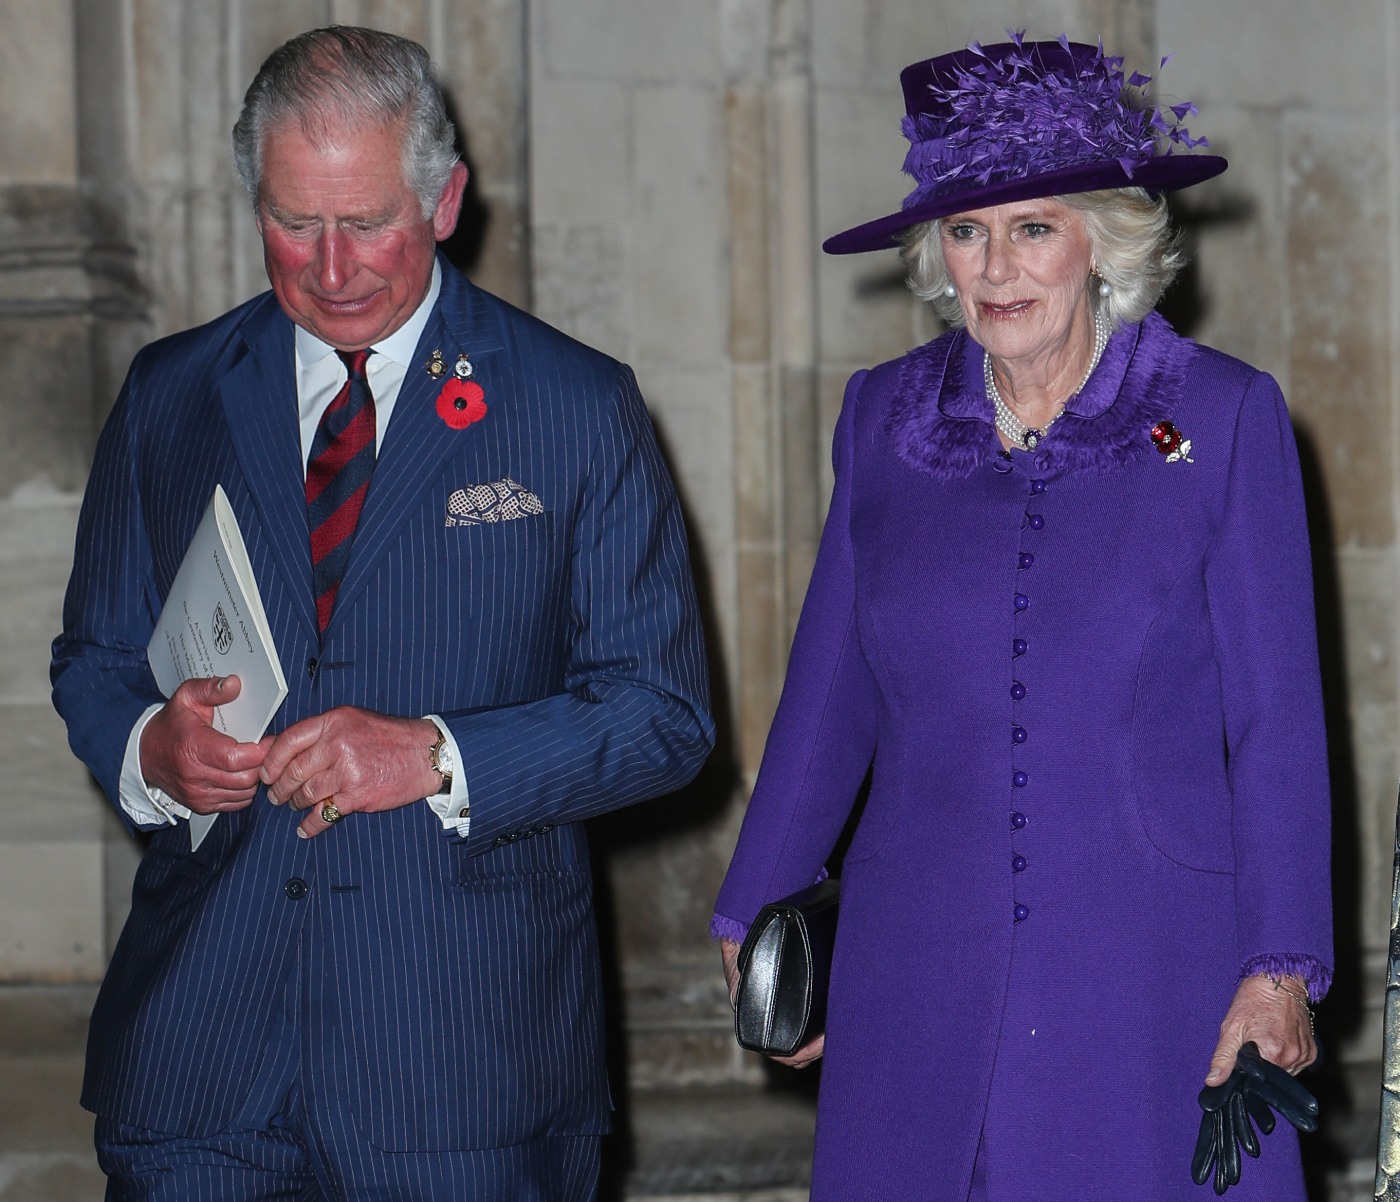 The Royal Family attends a Service to commemorate the Armistice on the centenary of the end of WWI